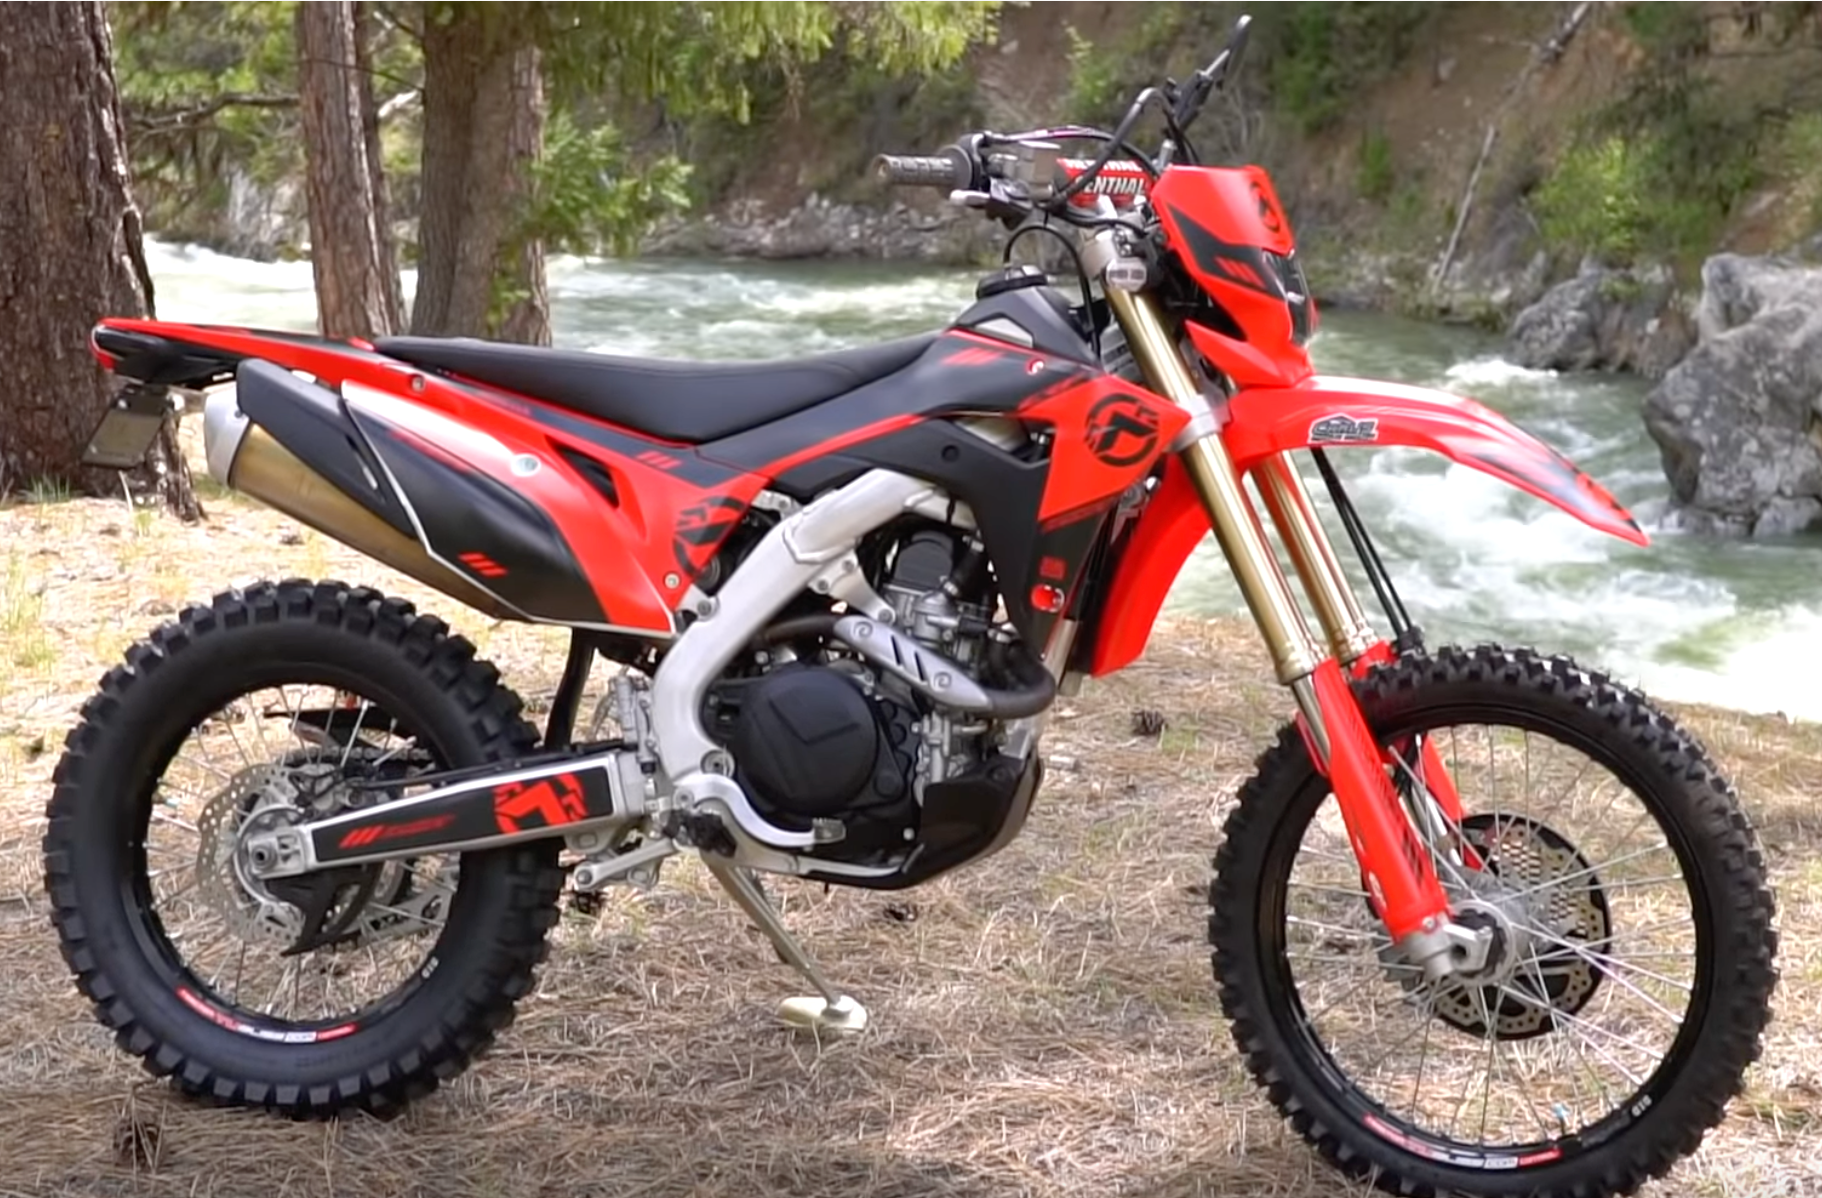 SINGLE TRACK TESTED: THE 2019 HONDA CRF450L WITH ADAM BOOTH